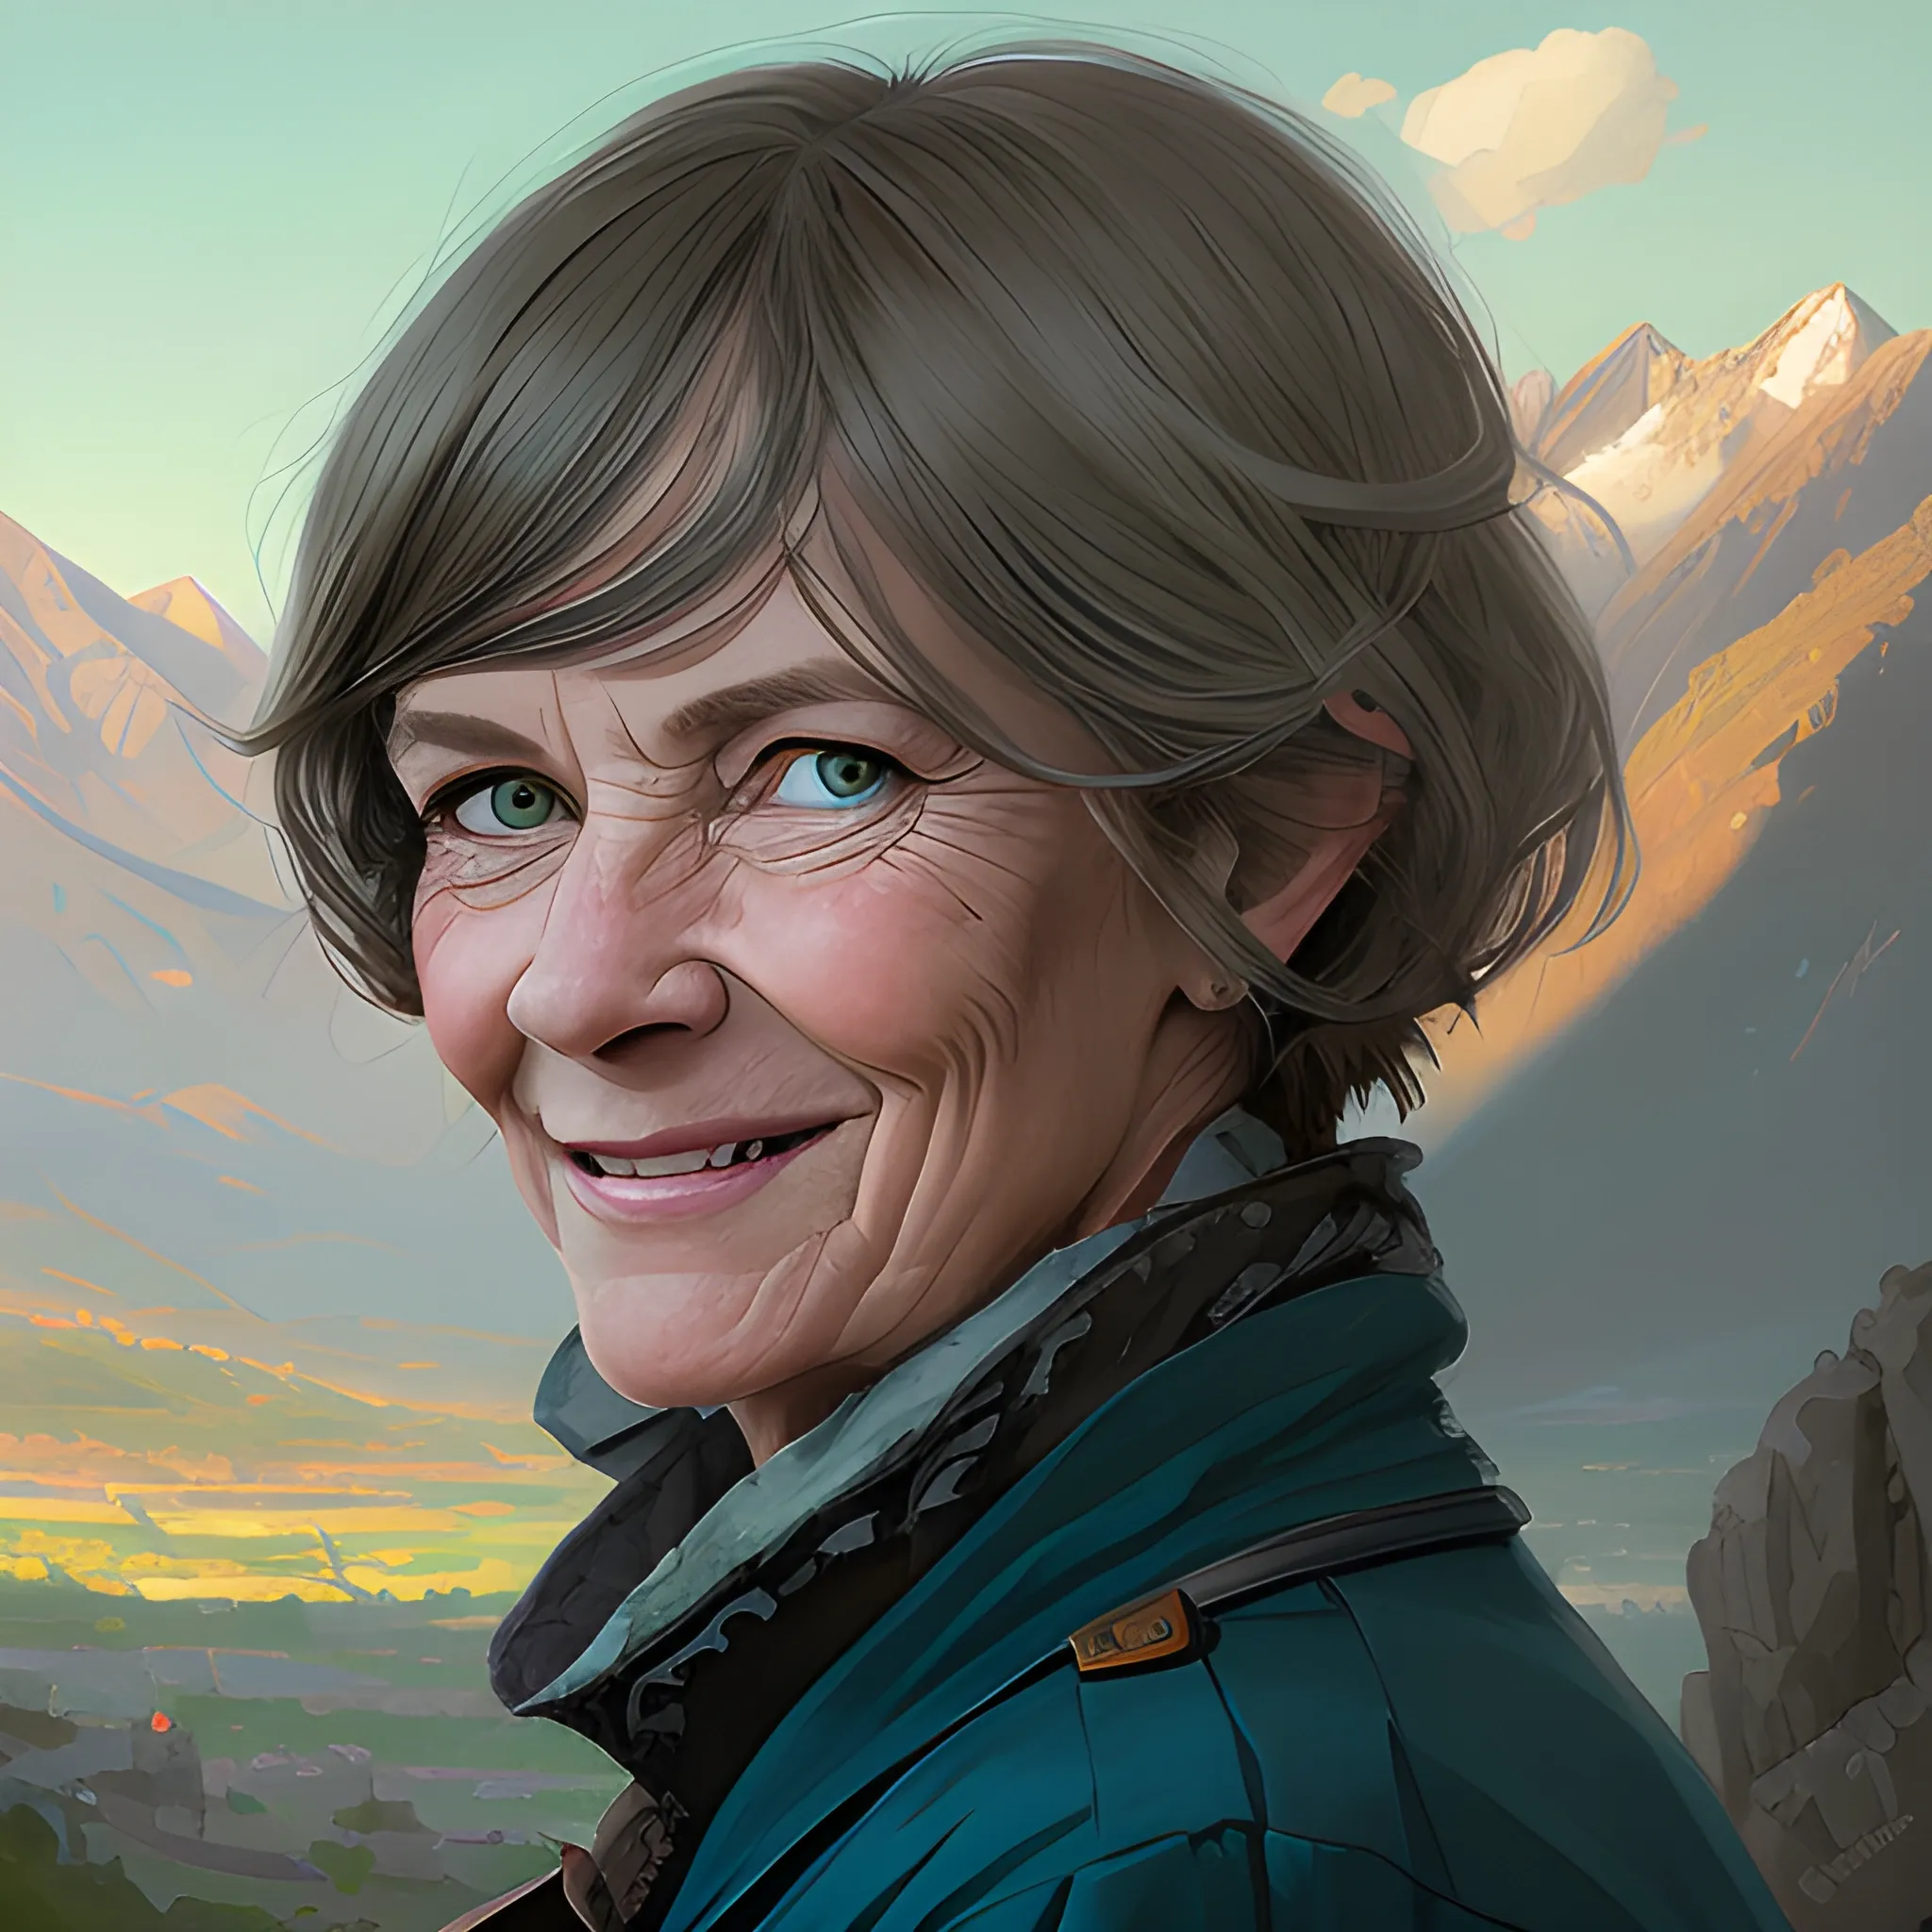 portrait of a midle aged woman by Greg Rutkowski, dark blond hair with timeless bob with bangs, attractive, symmetrical, kind, strong, smiling, highly detailed portrait, bright open green/blue eyes, mont canigou landscape in background, realistic digital art 